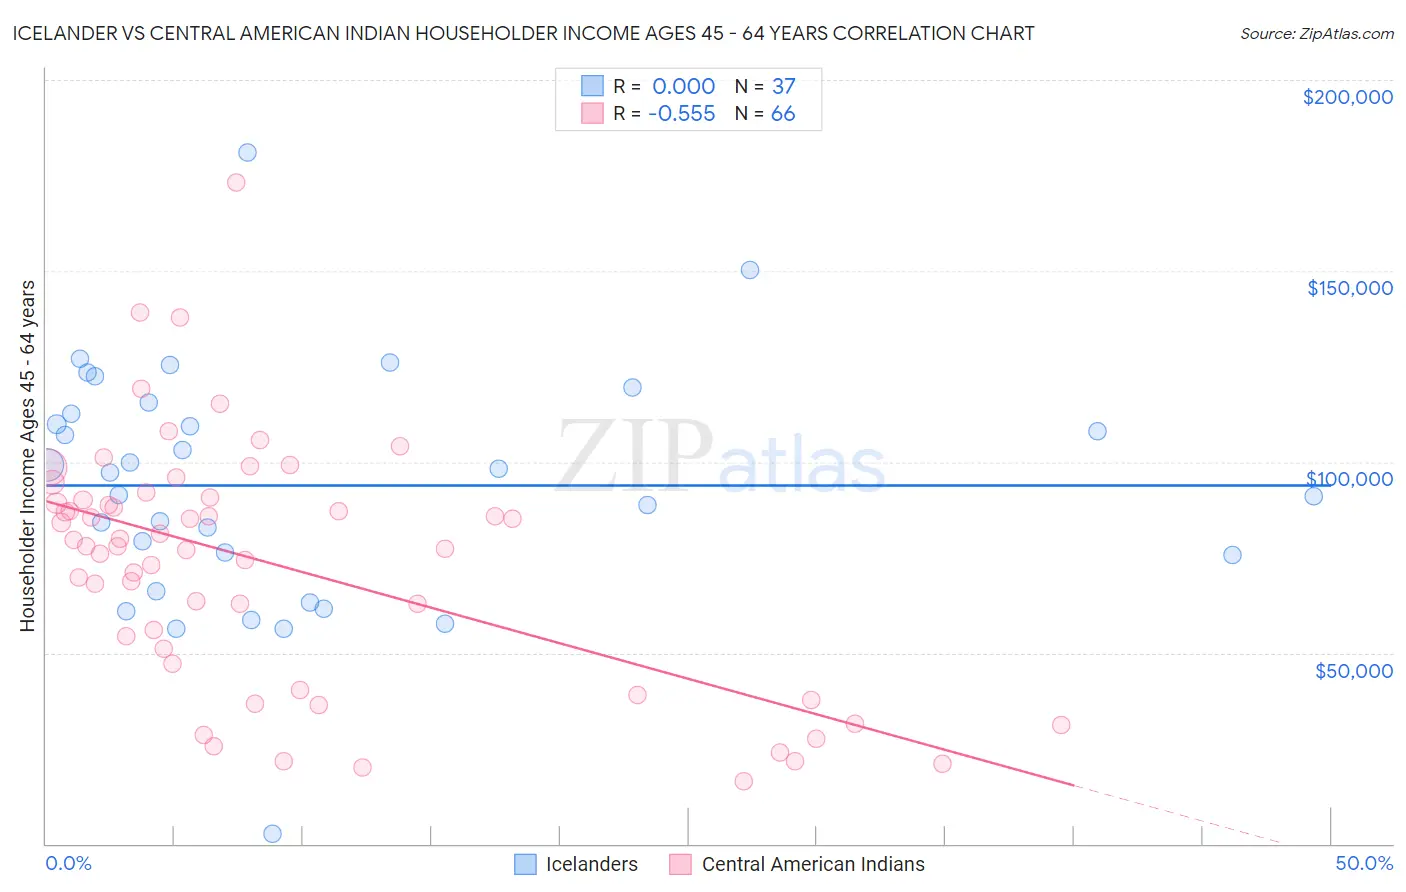 Icelander vs Central American Indian Householder Income Ages 45 - 64 years